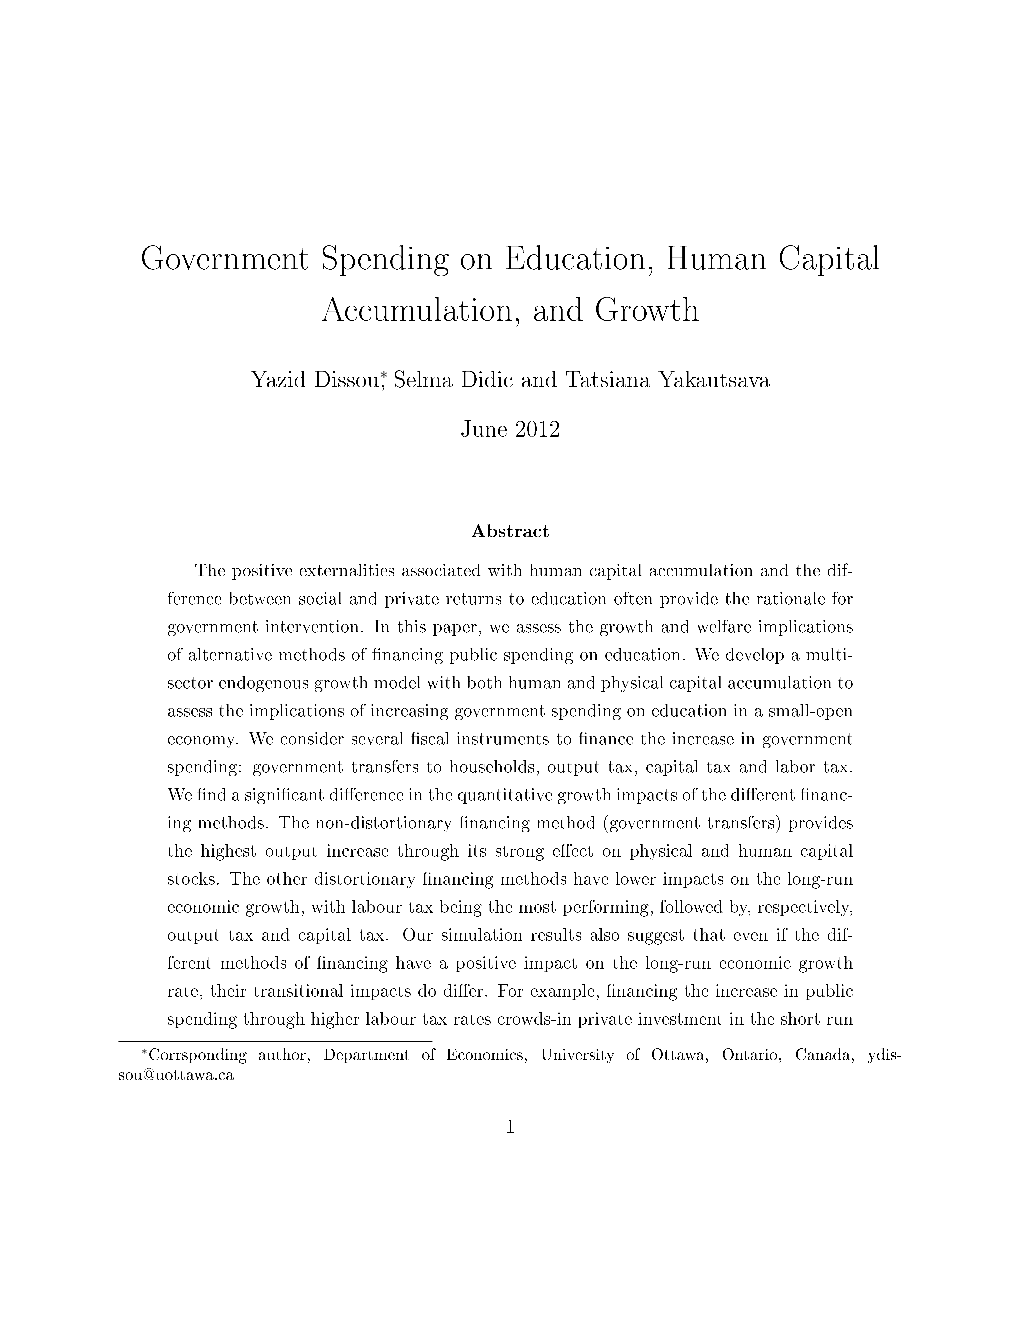 Government Spending on Education, Human Capital Accumulation, and Growth